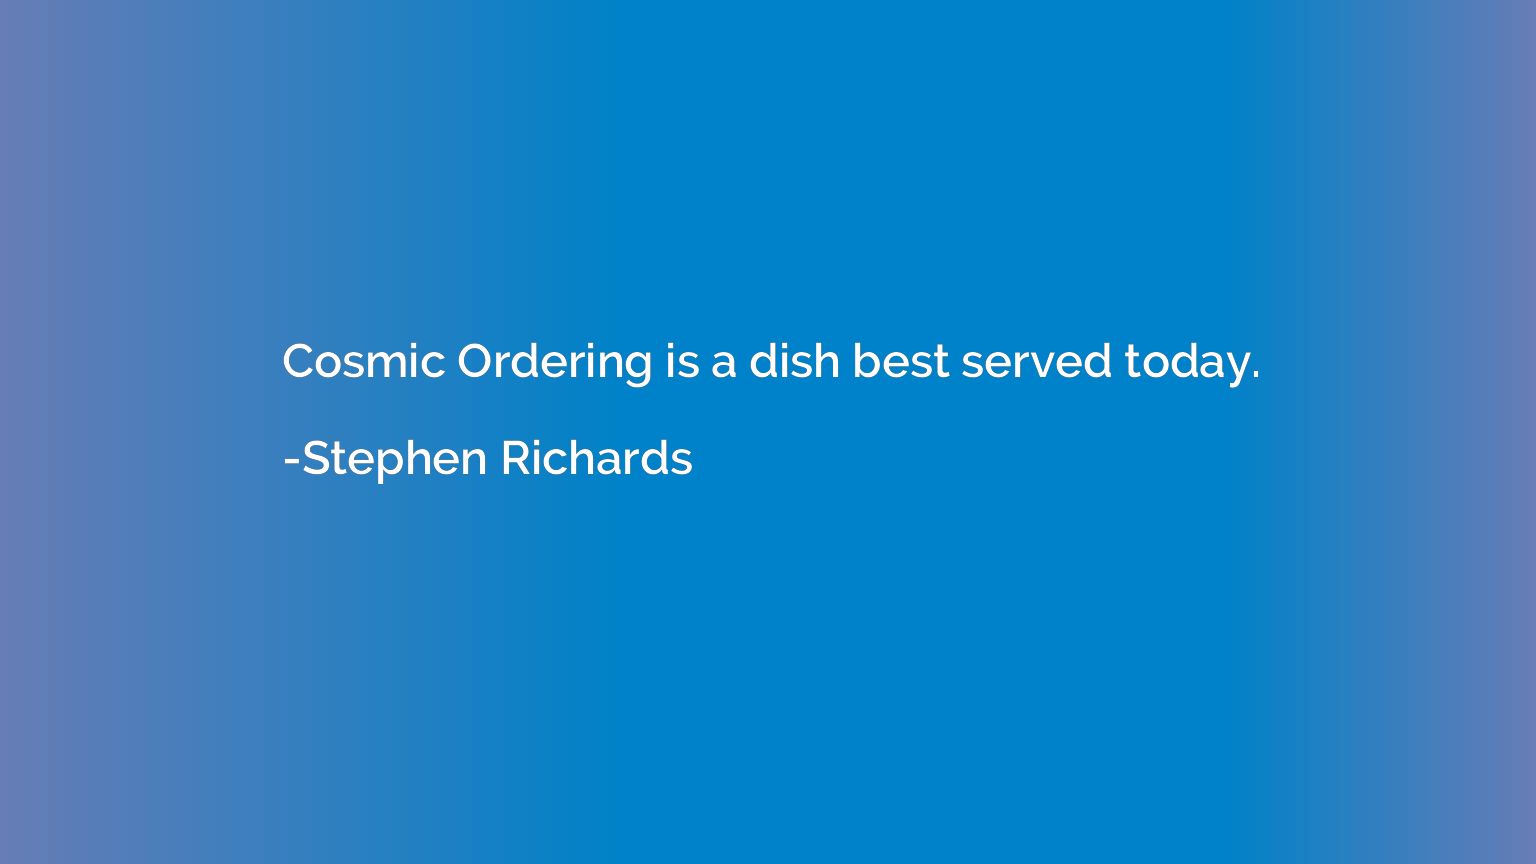 Cosmic Ordering is a dish best served today.